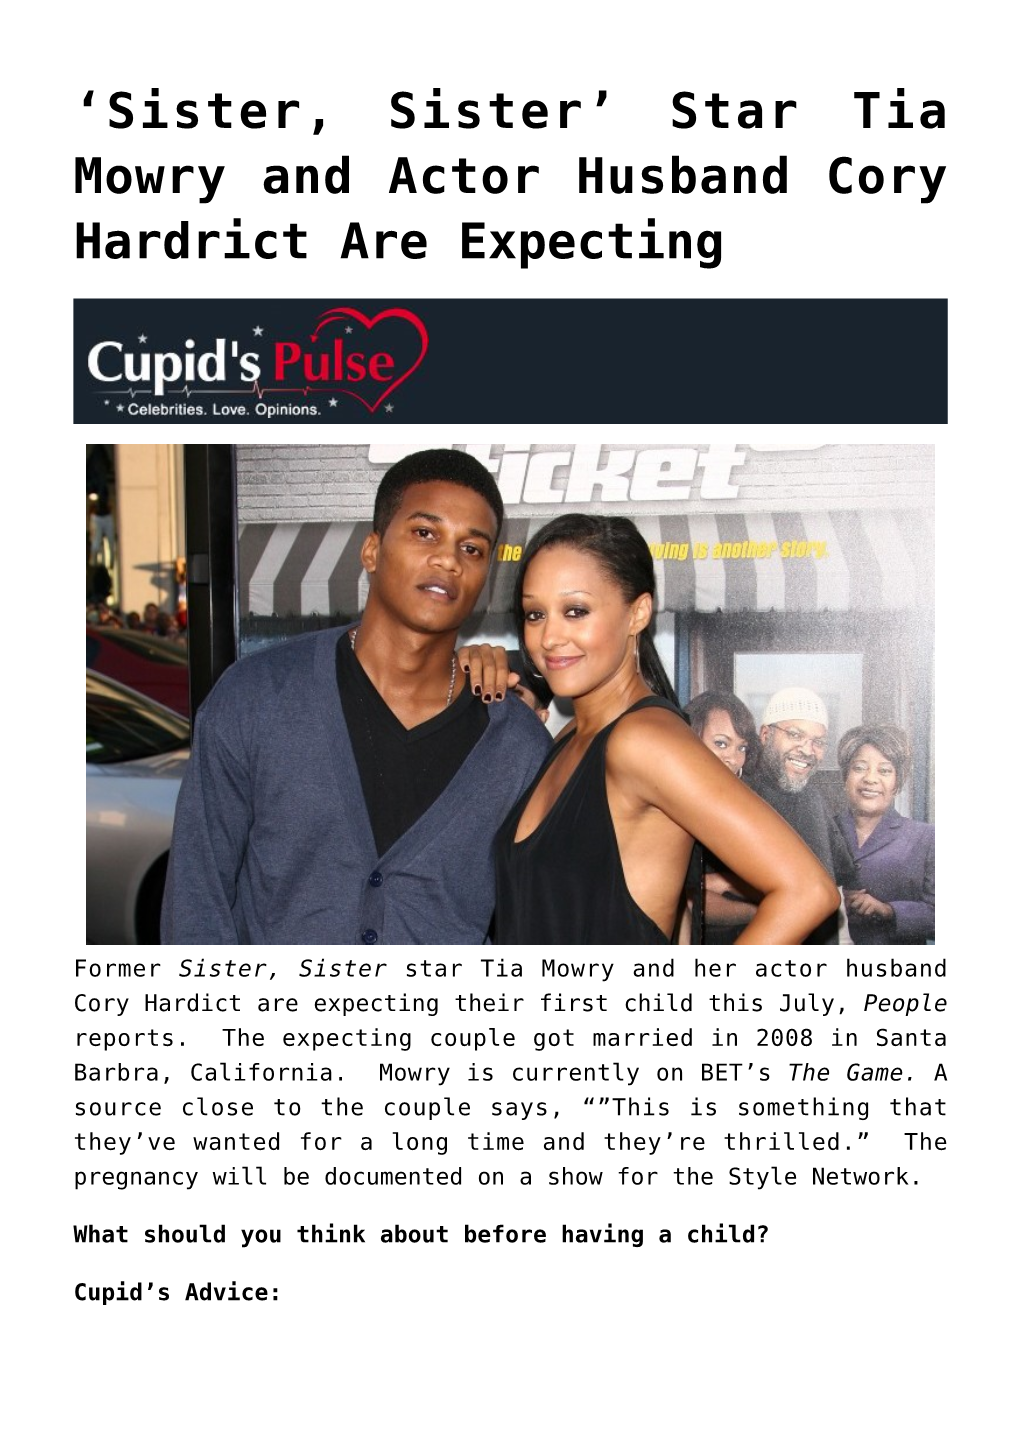 Star Tia Mowry and Actor Husband Cory Hardrict Are Expecting